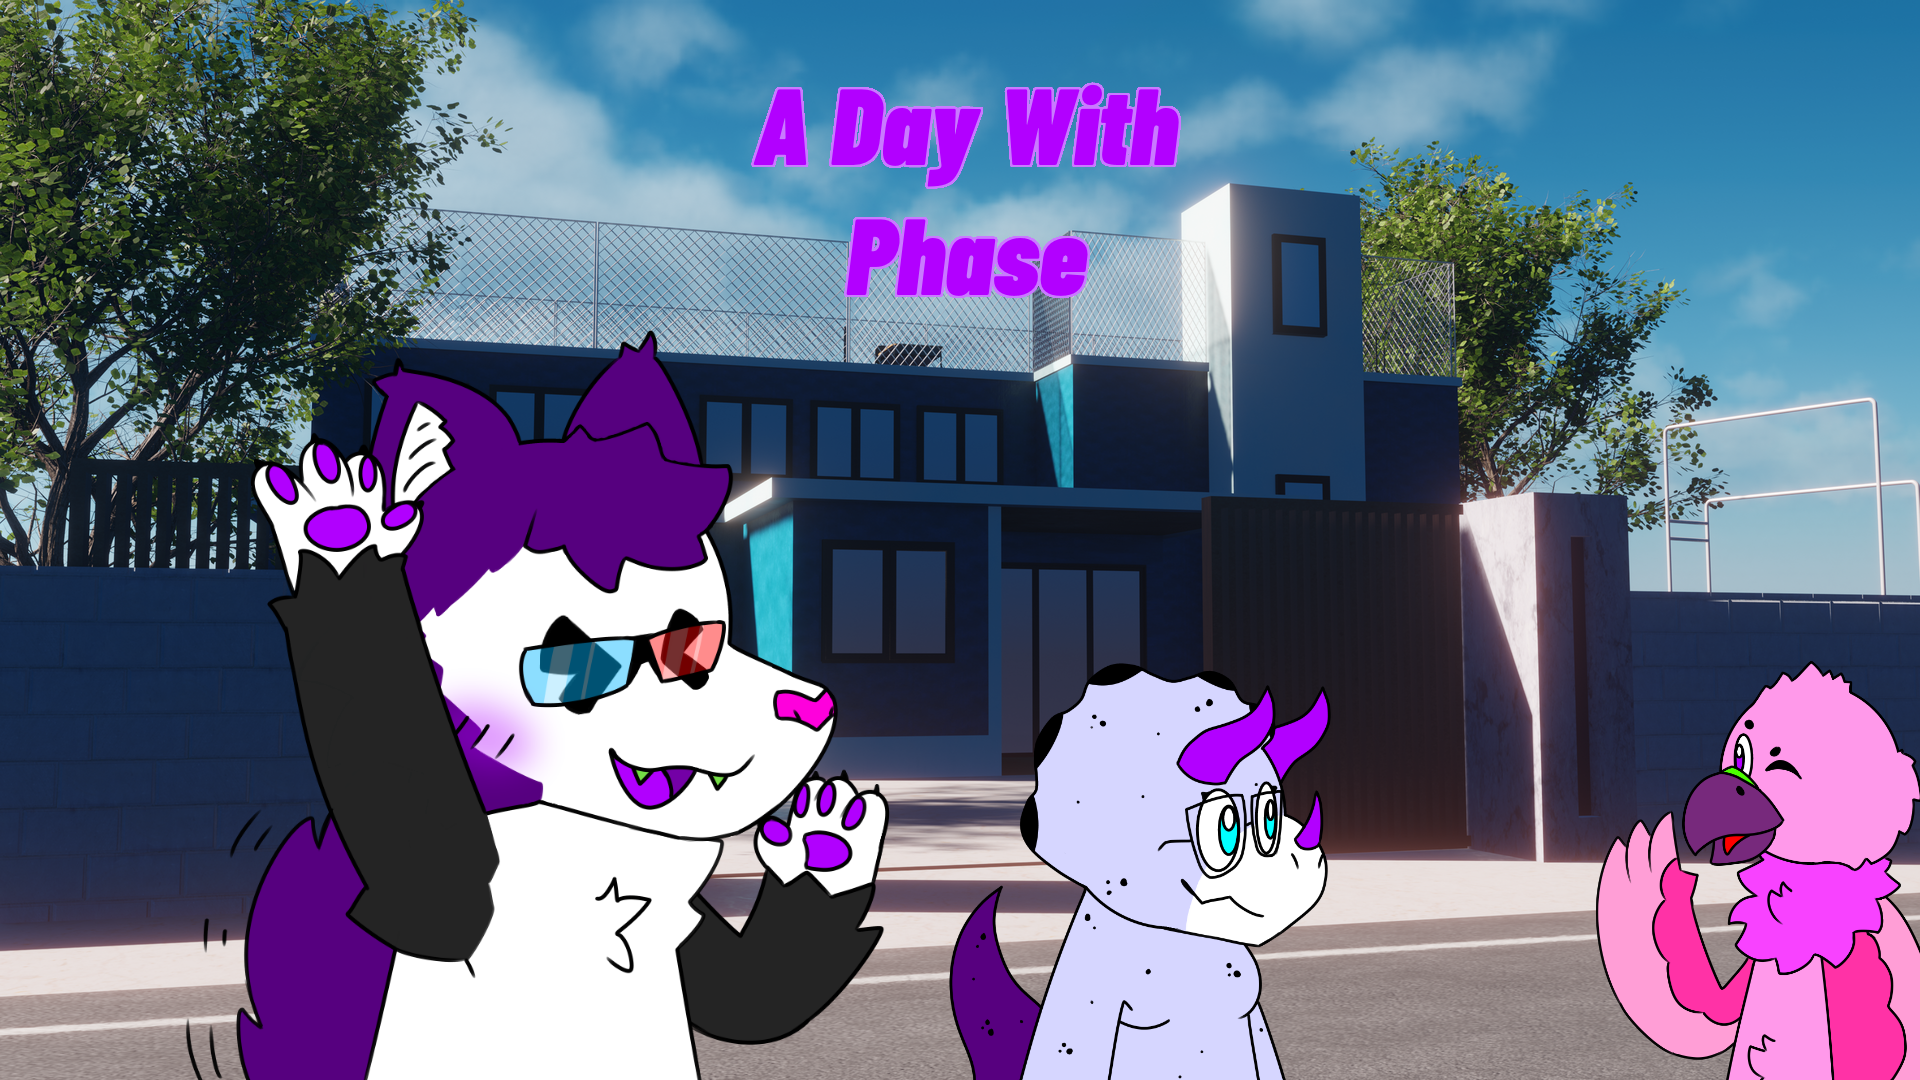 A Day With Phase